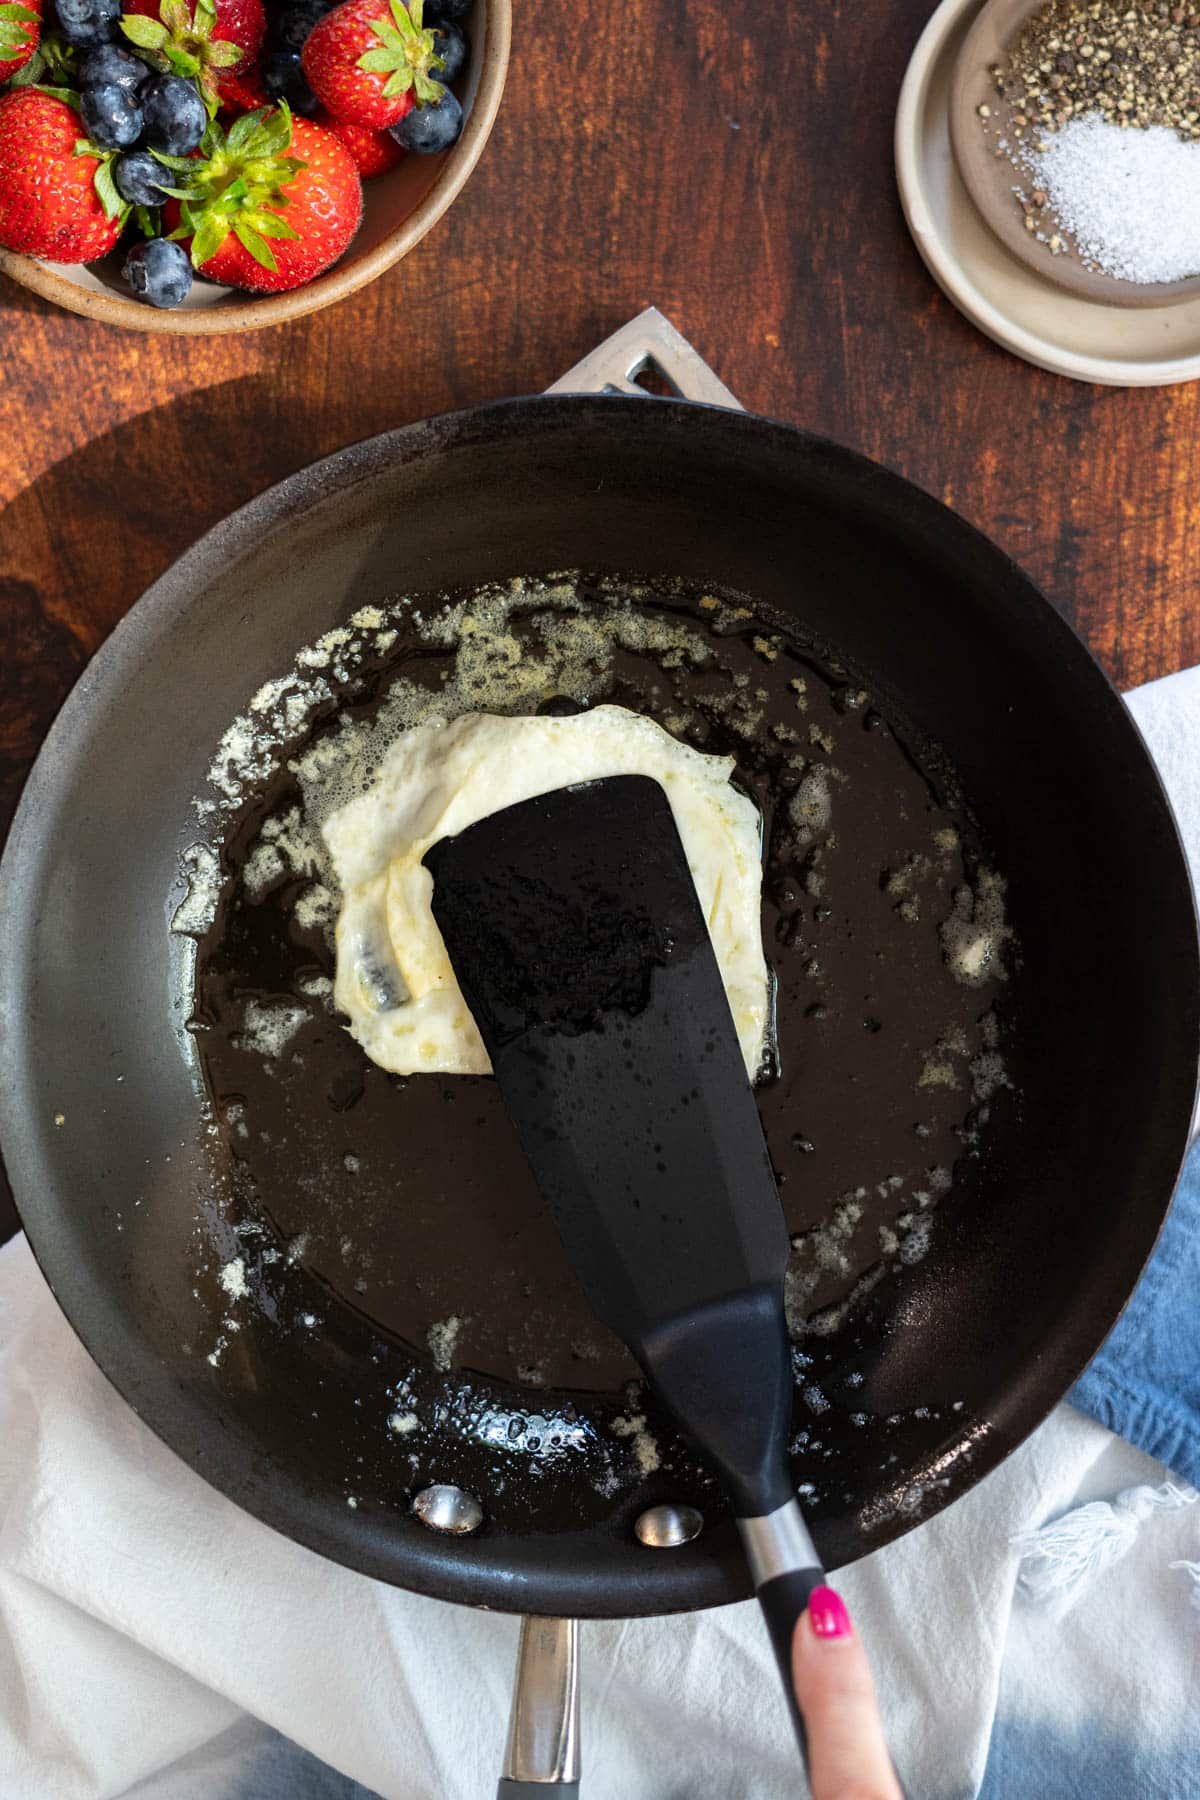 Breaking an egg yolk of a fried egg with a spatula. 